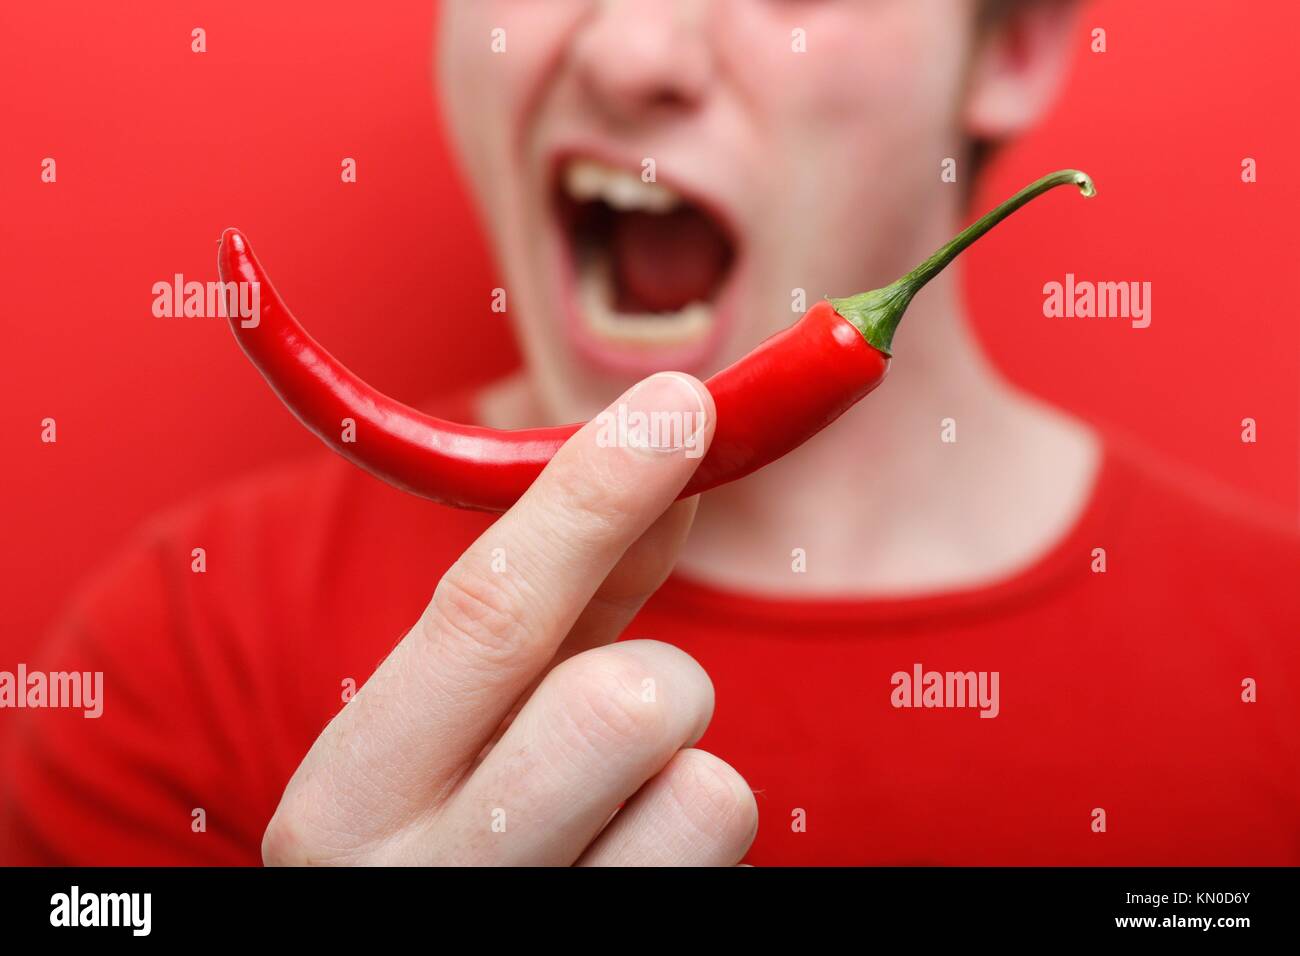 A man eating chili pepper Stock Photo - Alamy